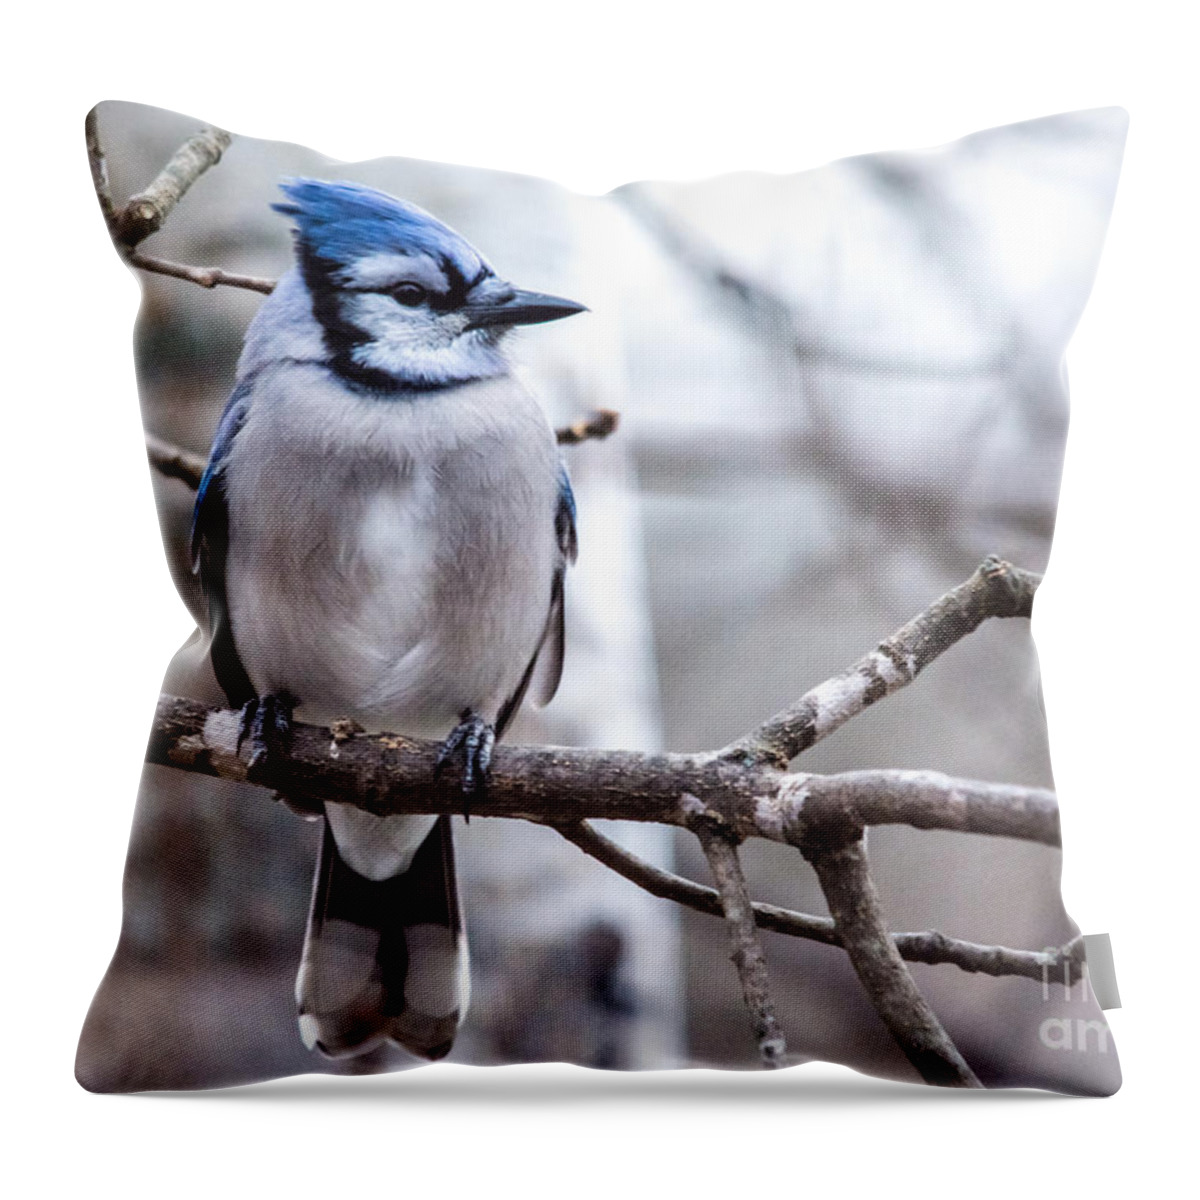  Throw Pillow featuring the photograph Gorgeous Blue Jay by Cheryl Baxter